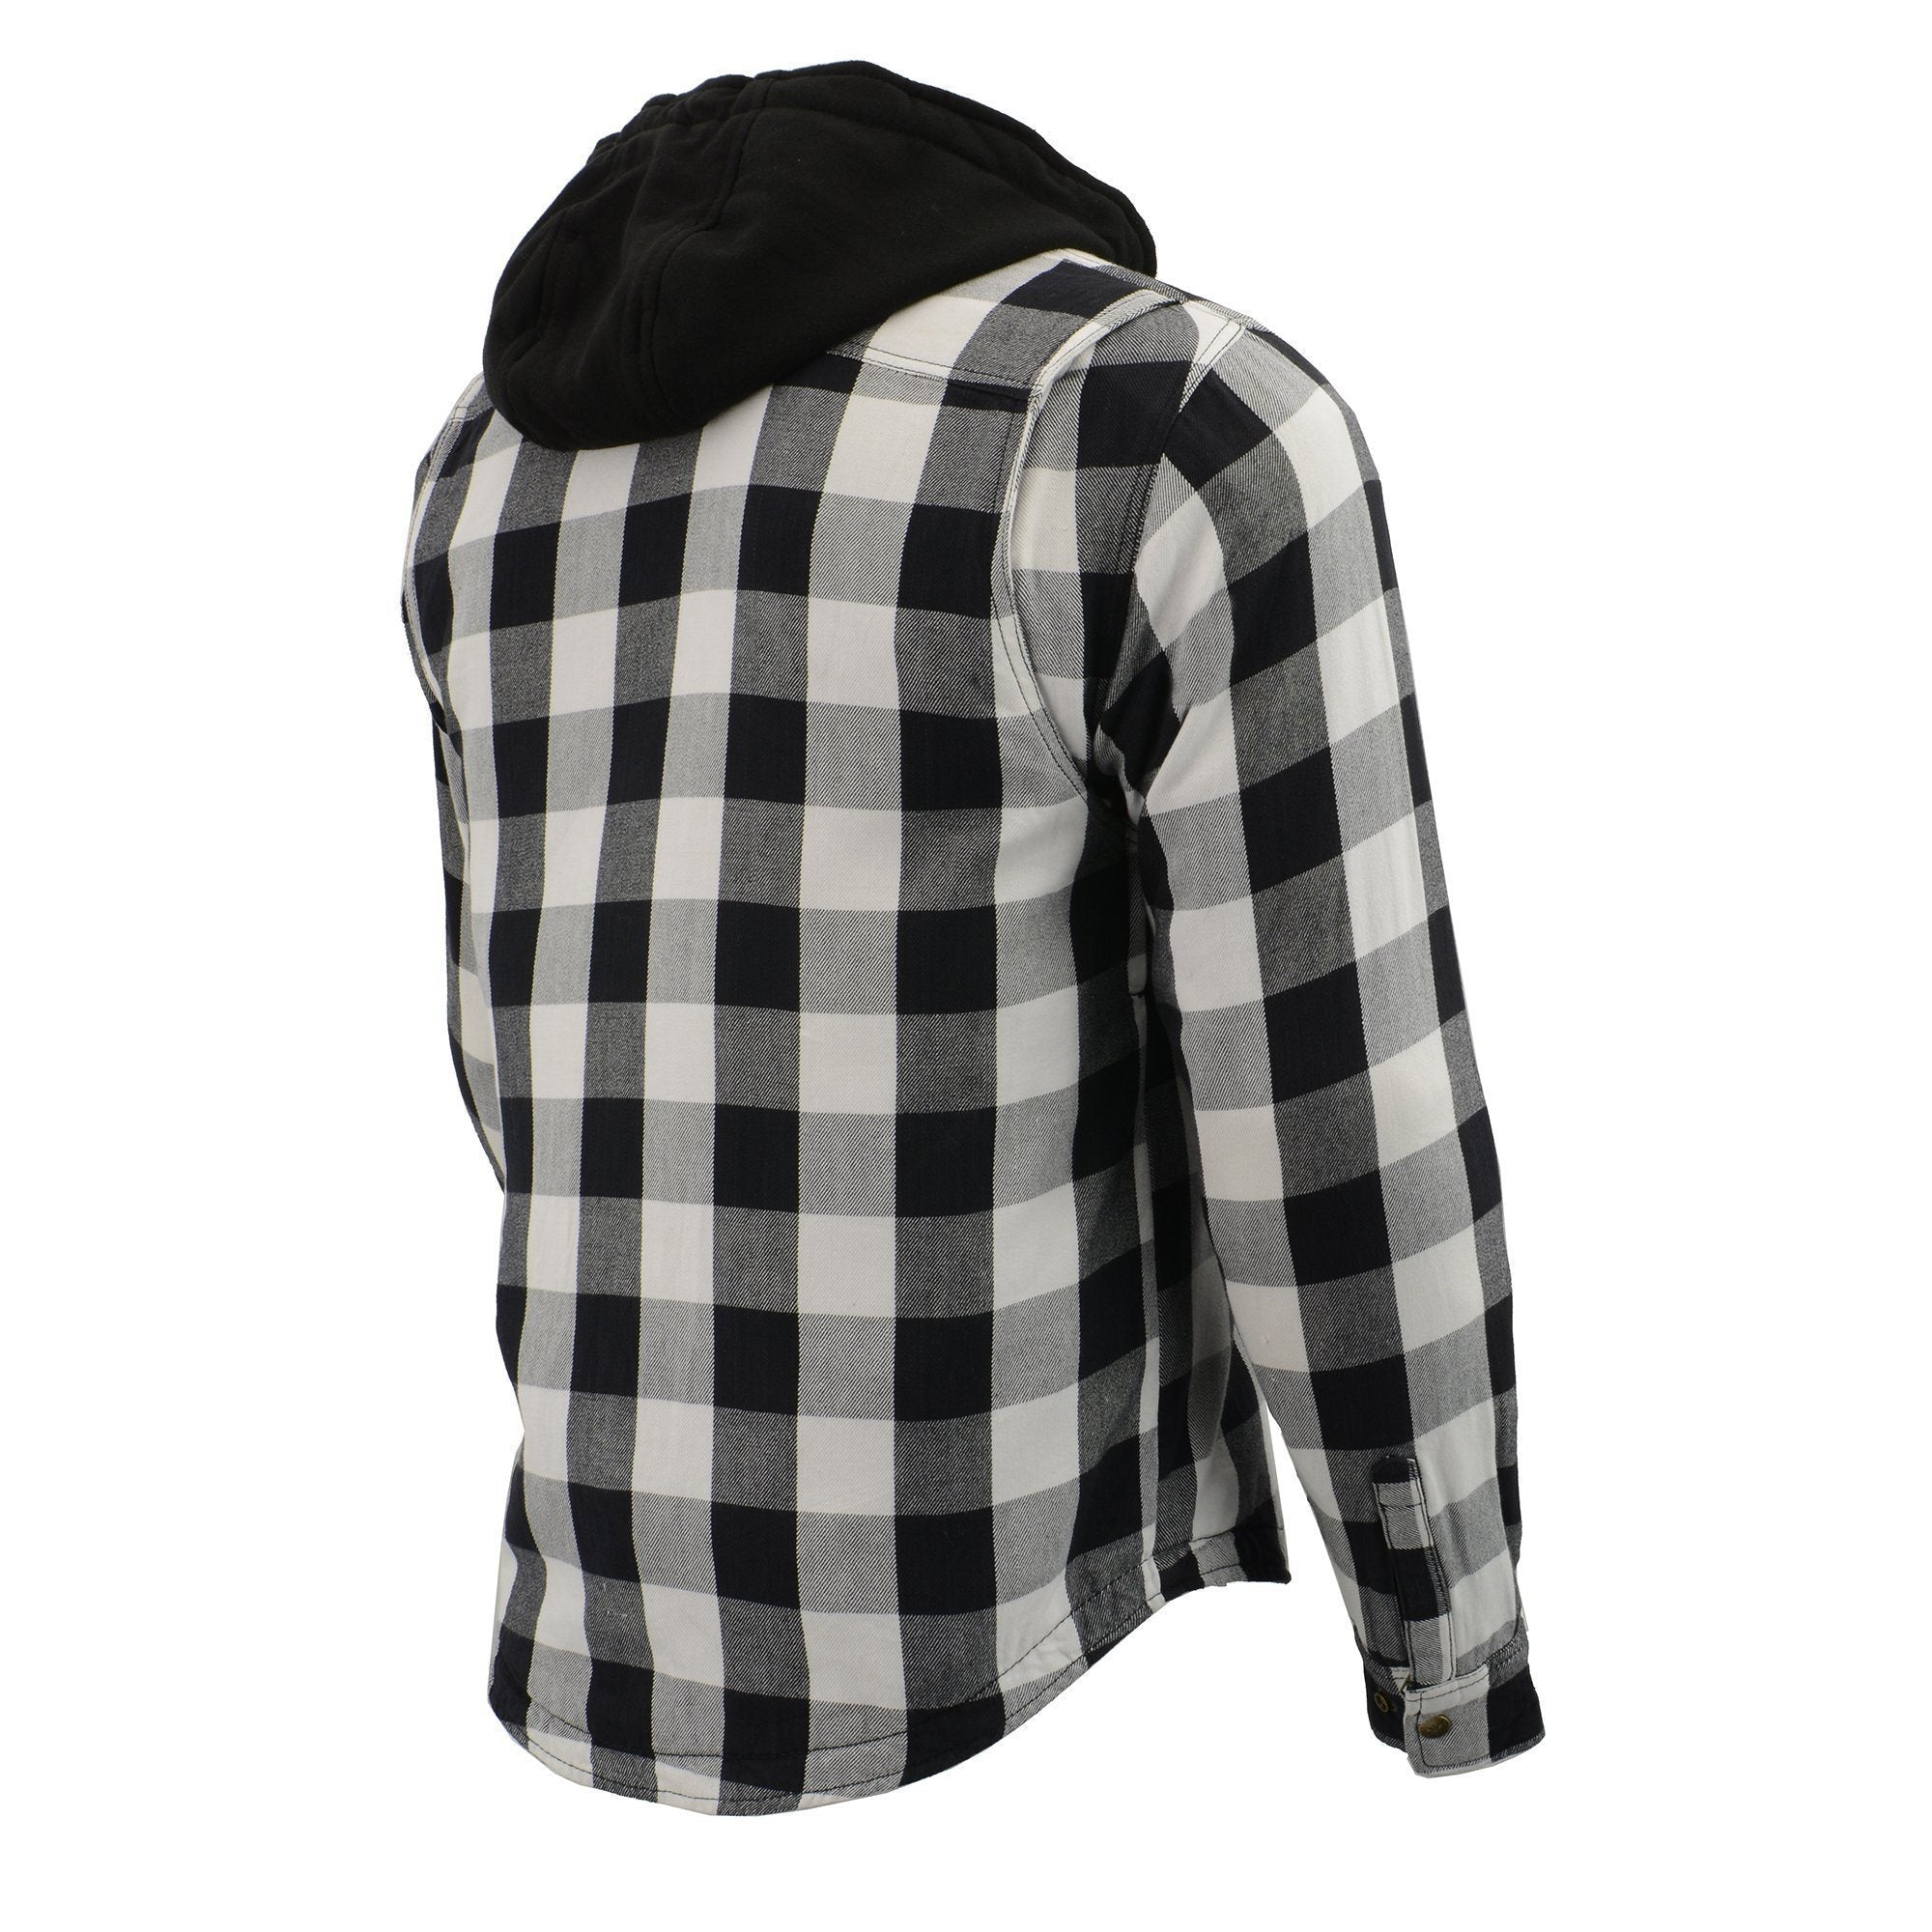 Milwaukee Leather MPM1629 Men's Plaid Hooded Flannel Biker Shirt with CE Approved Armor - Reinforced w/ Aramid Fibers